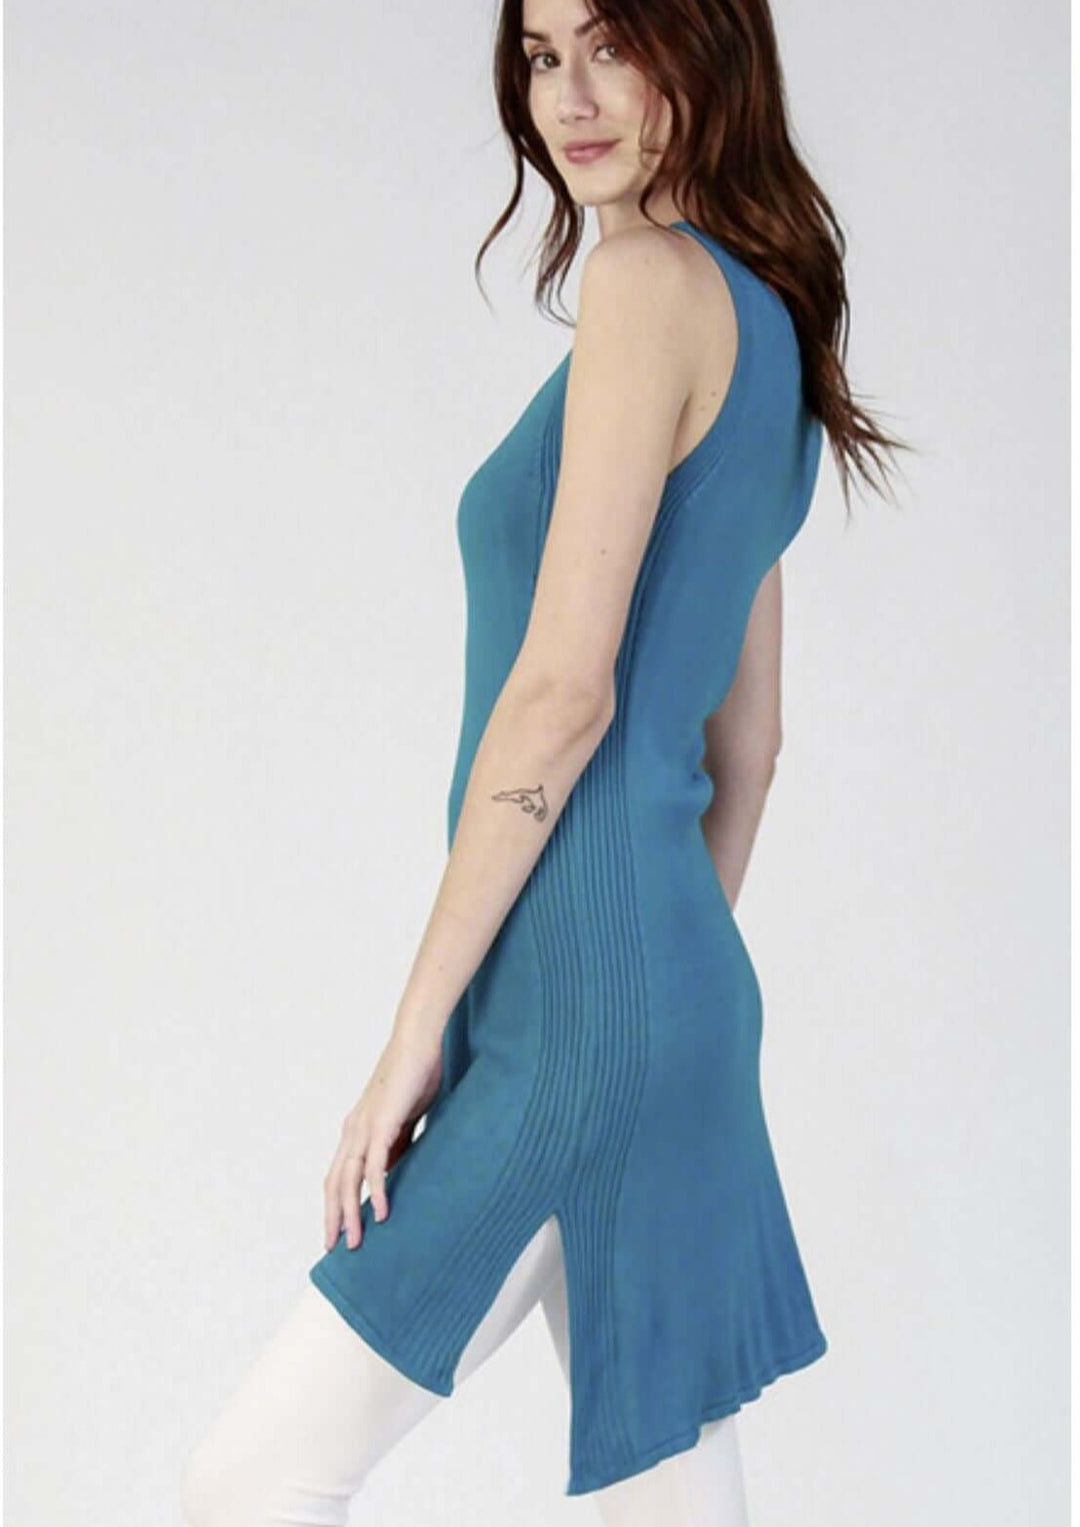 Ladies Scuba Blue Full Fashion A-Line Sleeveless Sweater Tunic with boat neckline.  This Tunic is great for long line layering with Leggings | Made in USA